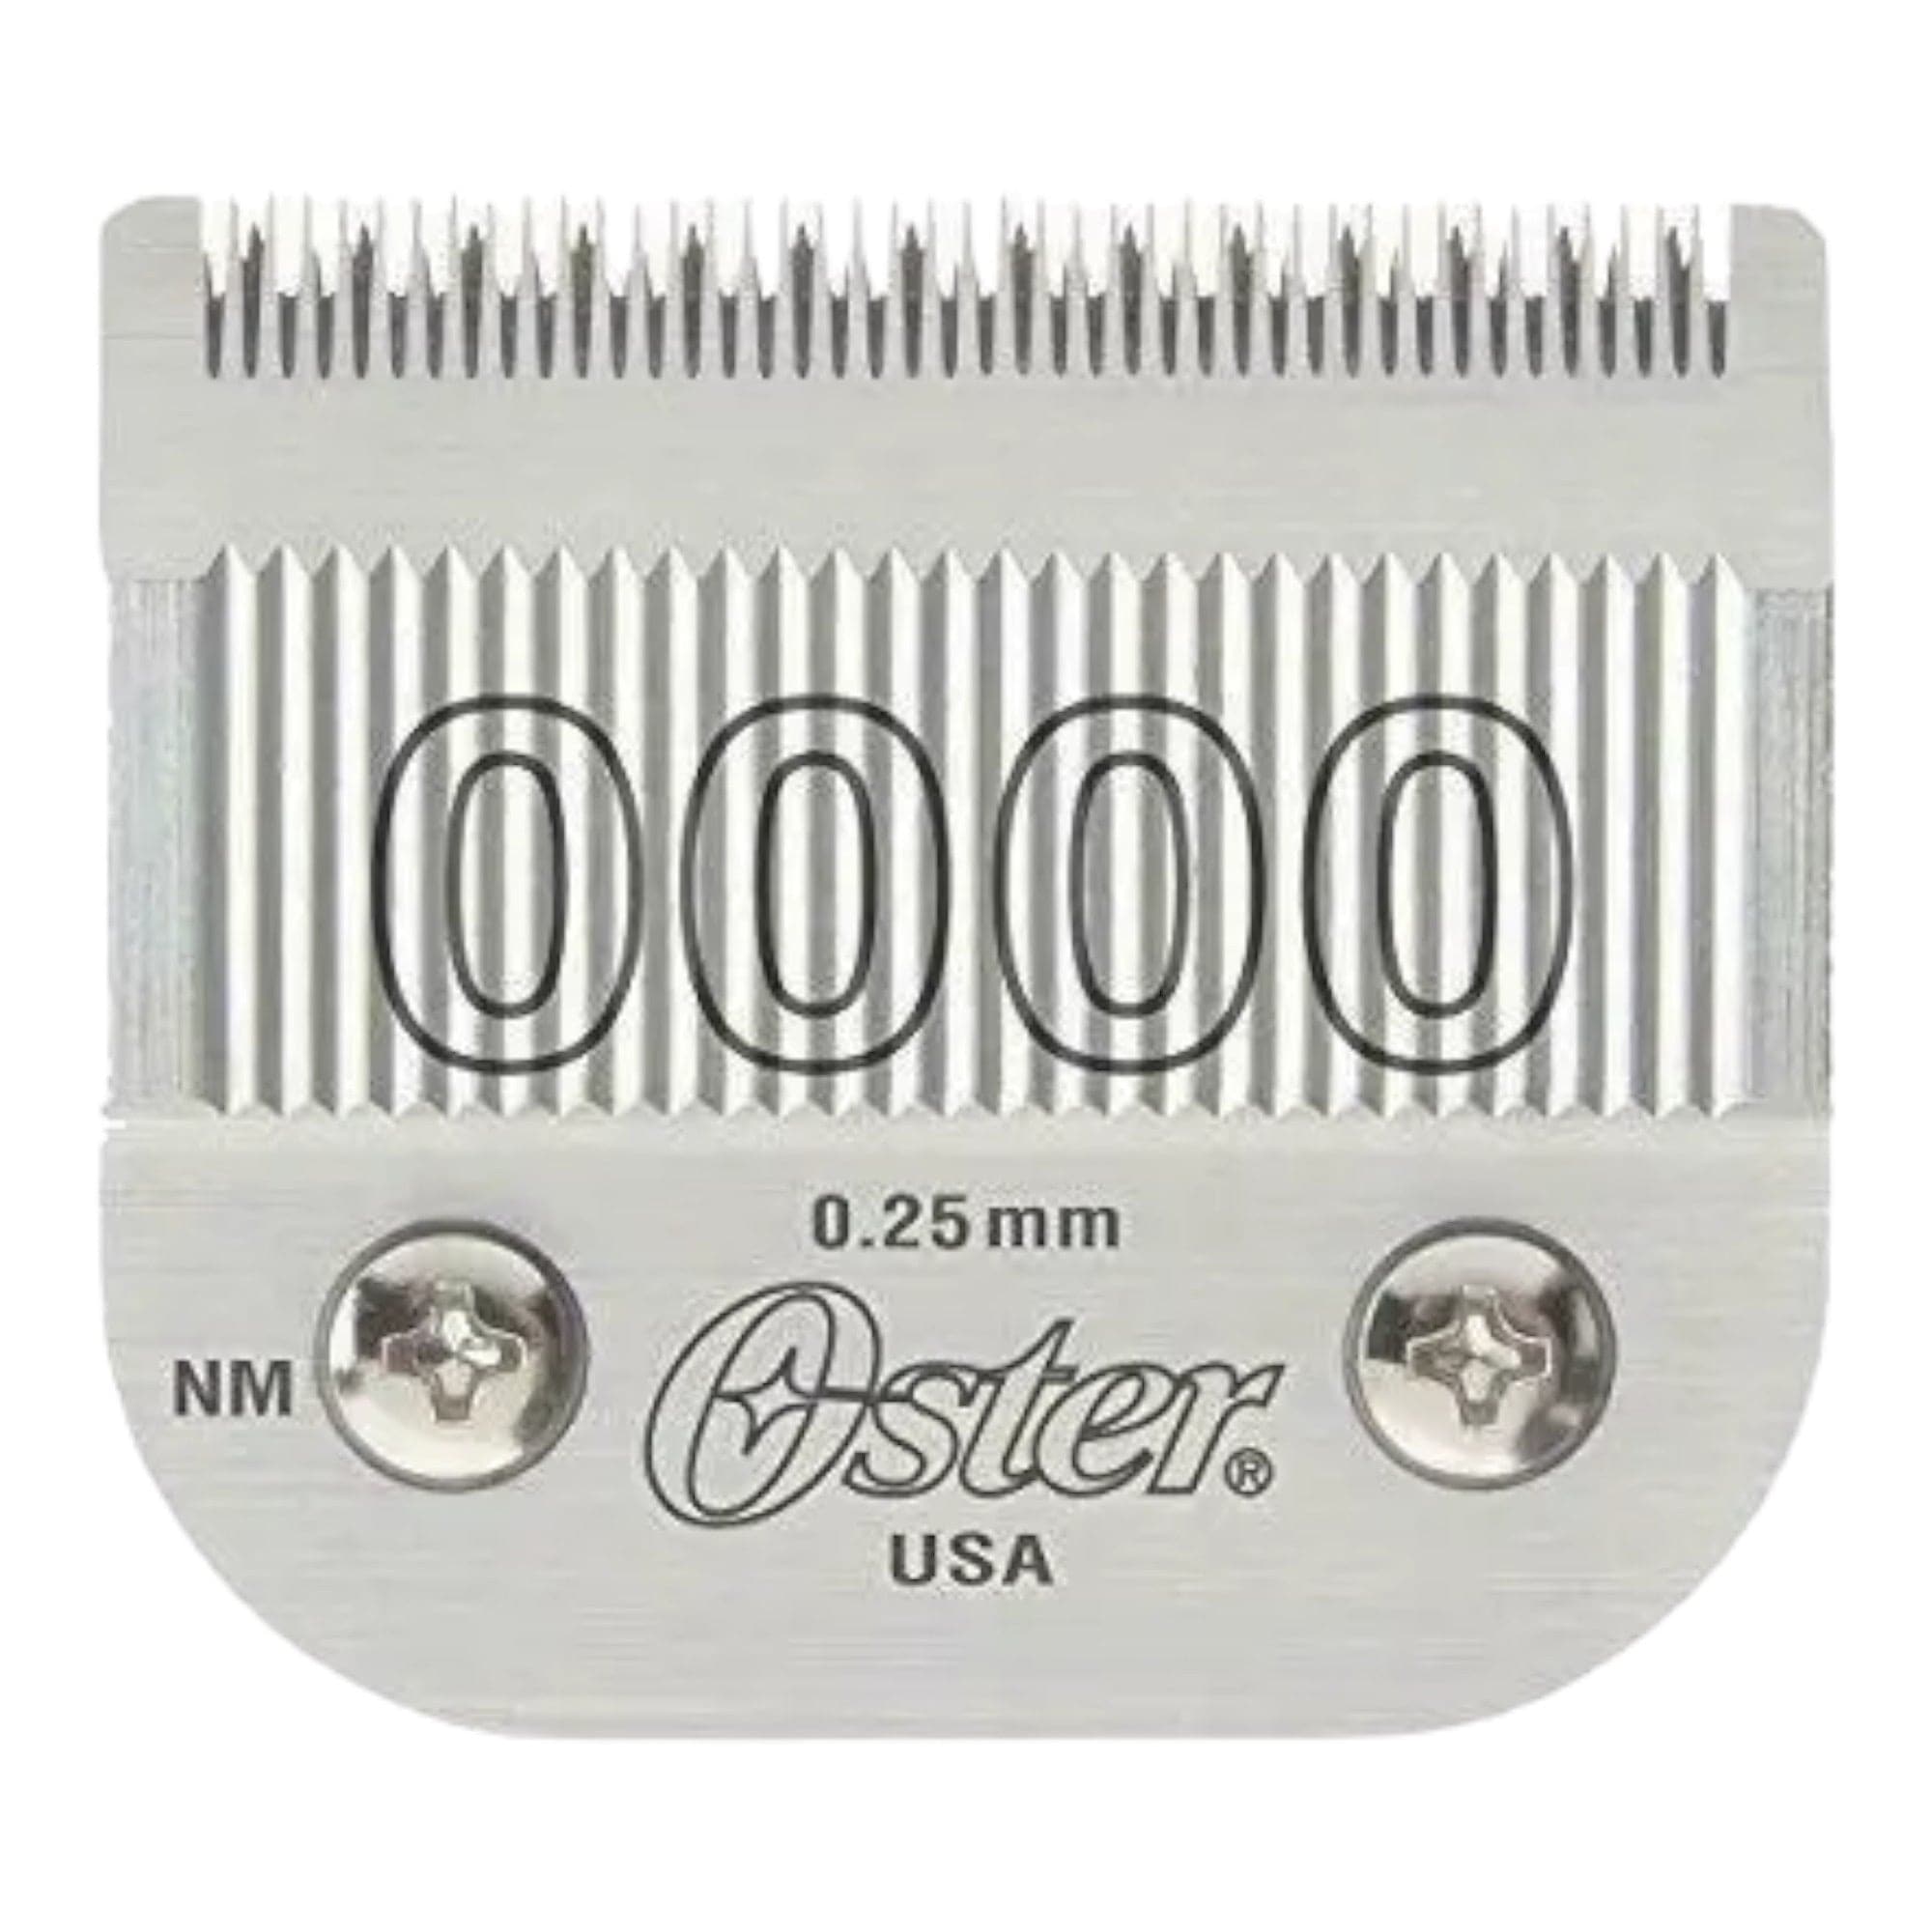 Oster - 076918-016 Detachable Blade Size 0000 - 0.25mm